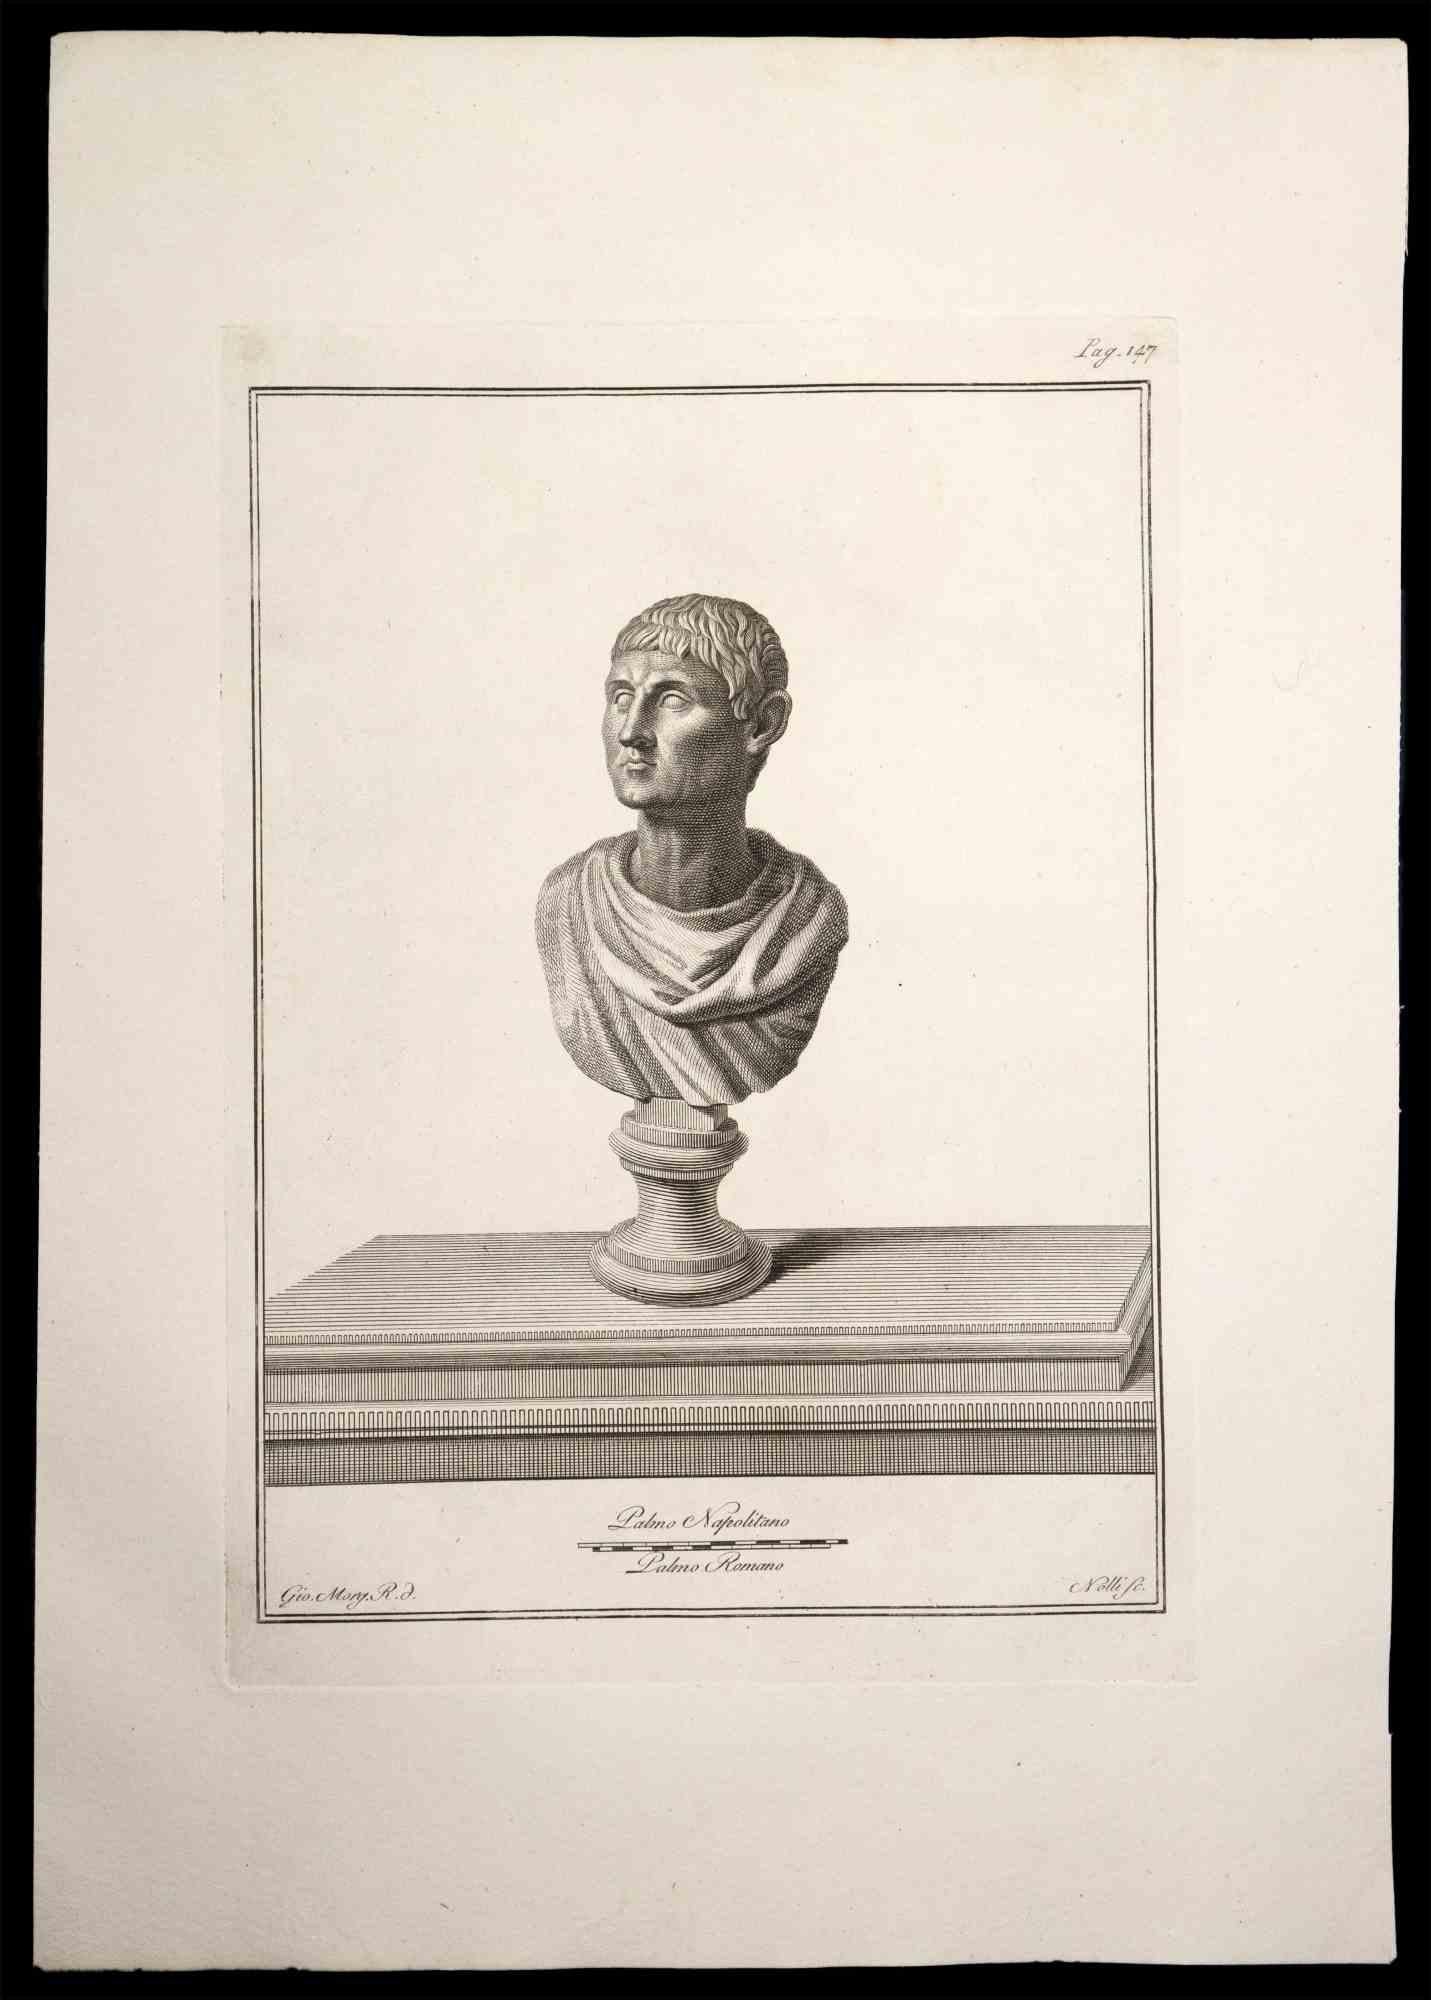 Ancient Roman Bust, from the series "Antiquities of Herculaneum", is an original etching on paper realized by Carlo Nolli in the 18th century.

Signed on the plate, on the lower right.

Good conditions.

The etching belongs to the print suite